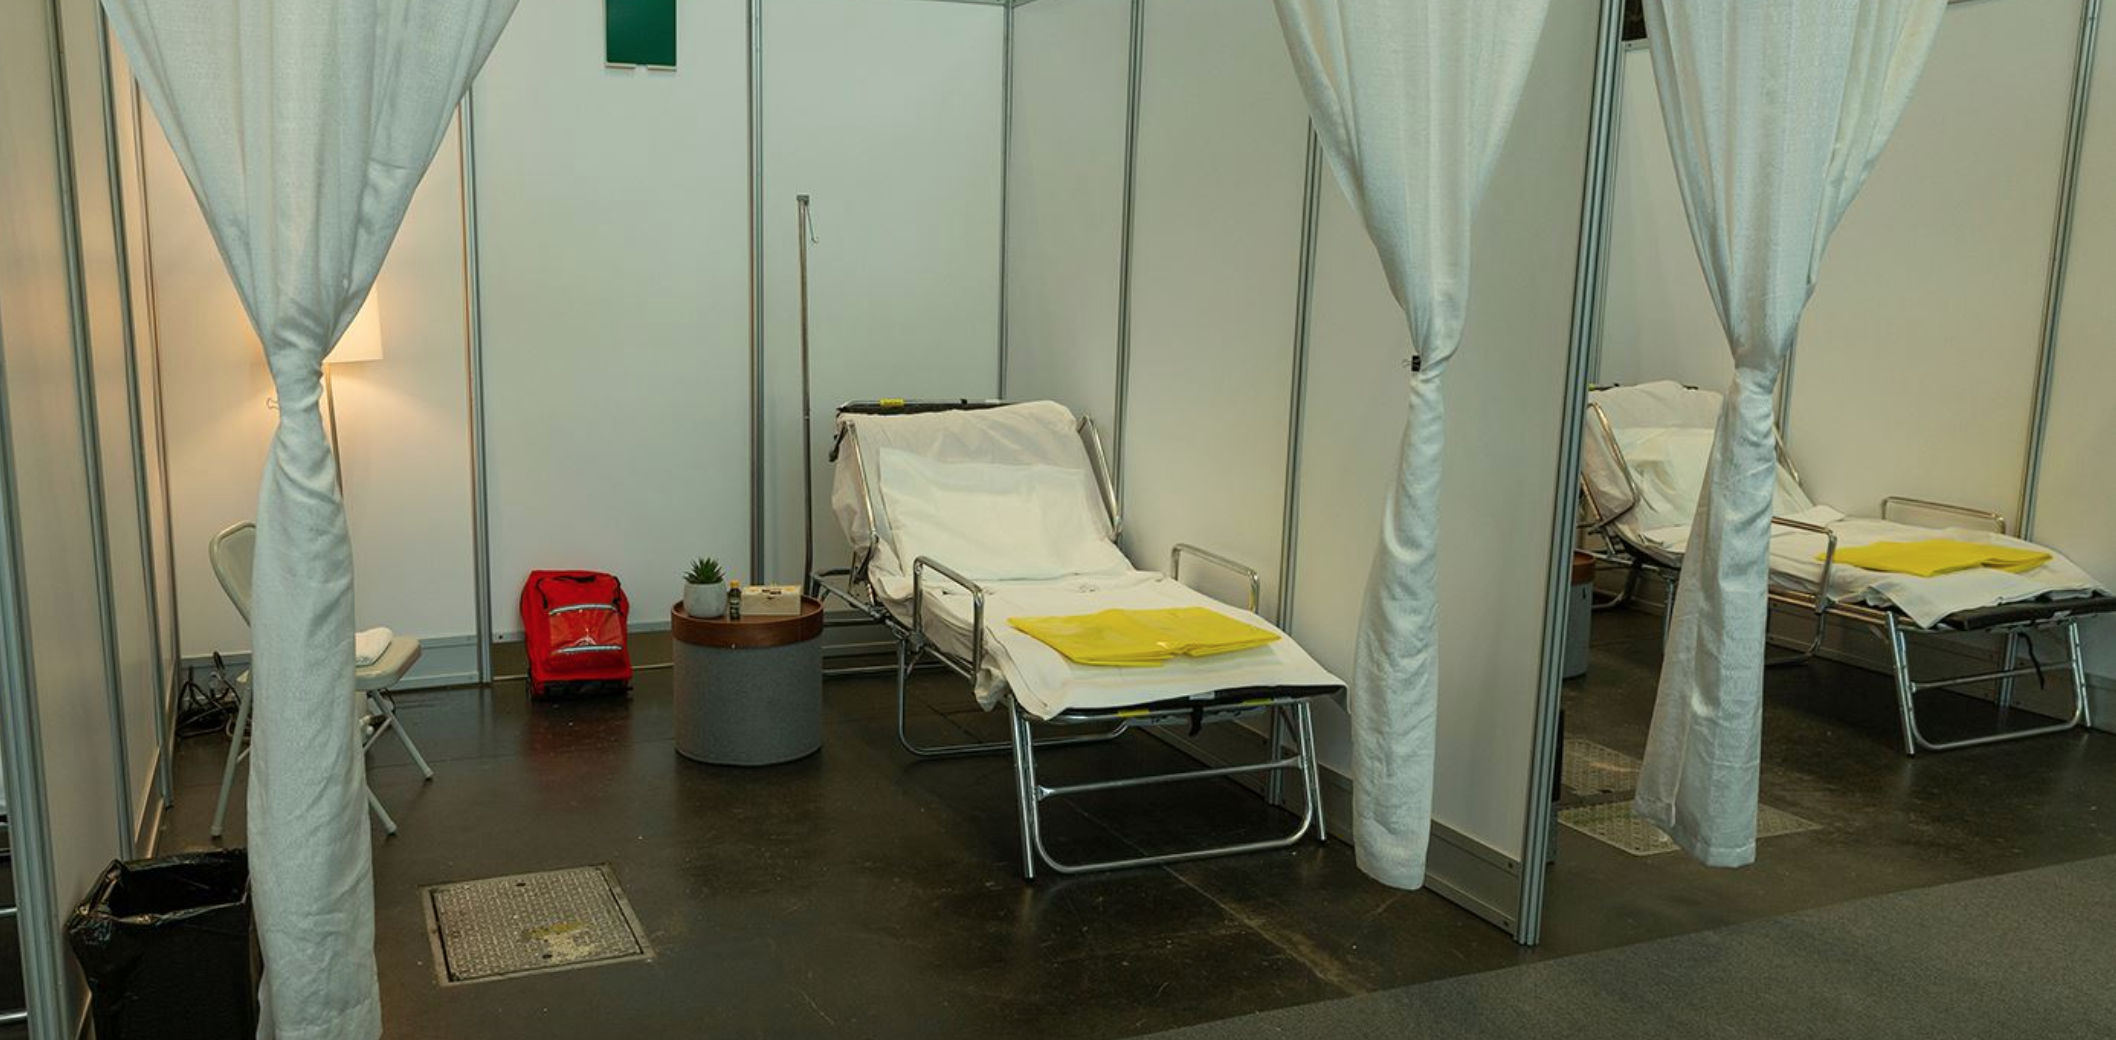 COVID-19 patient rooms in alternate care facility